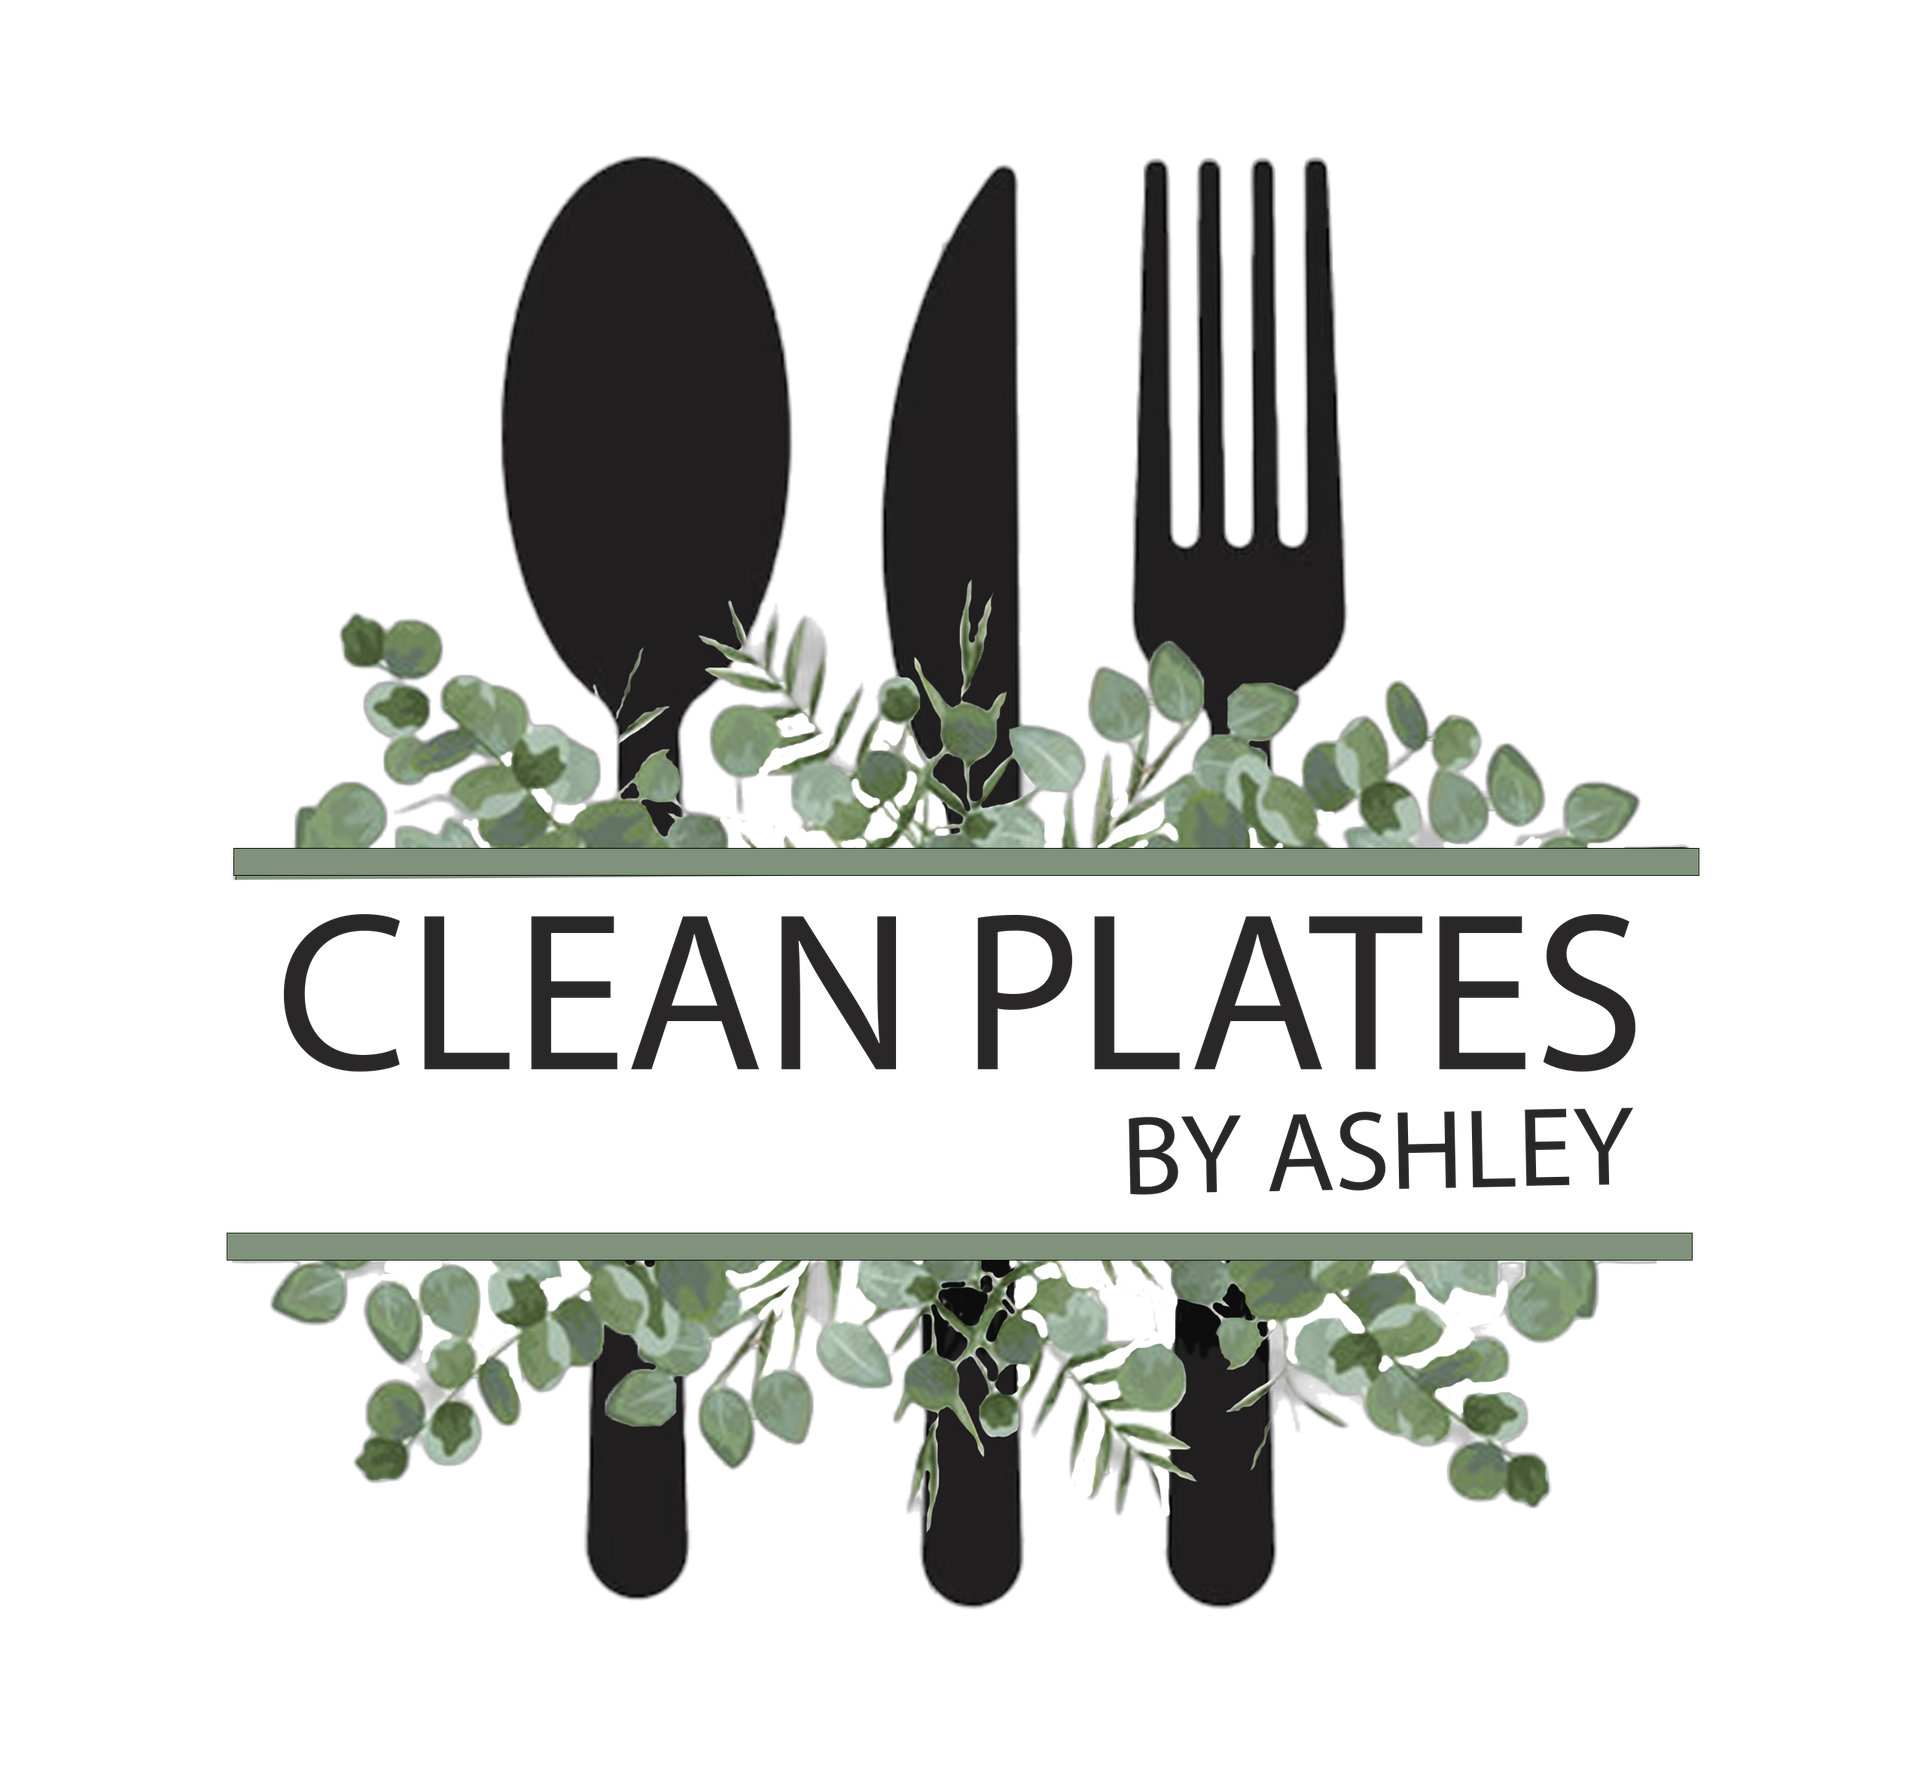 Clean Plates by Ashley